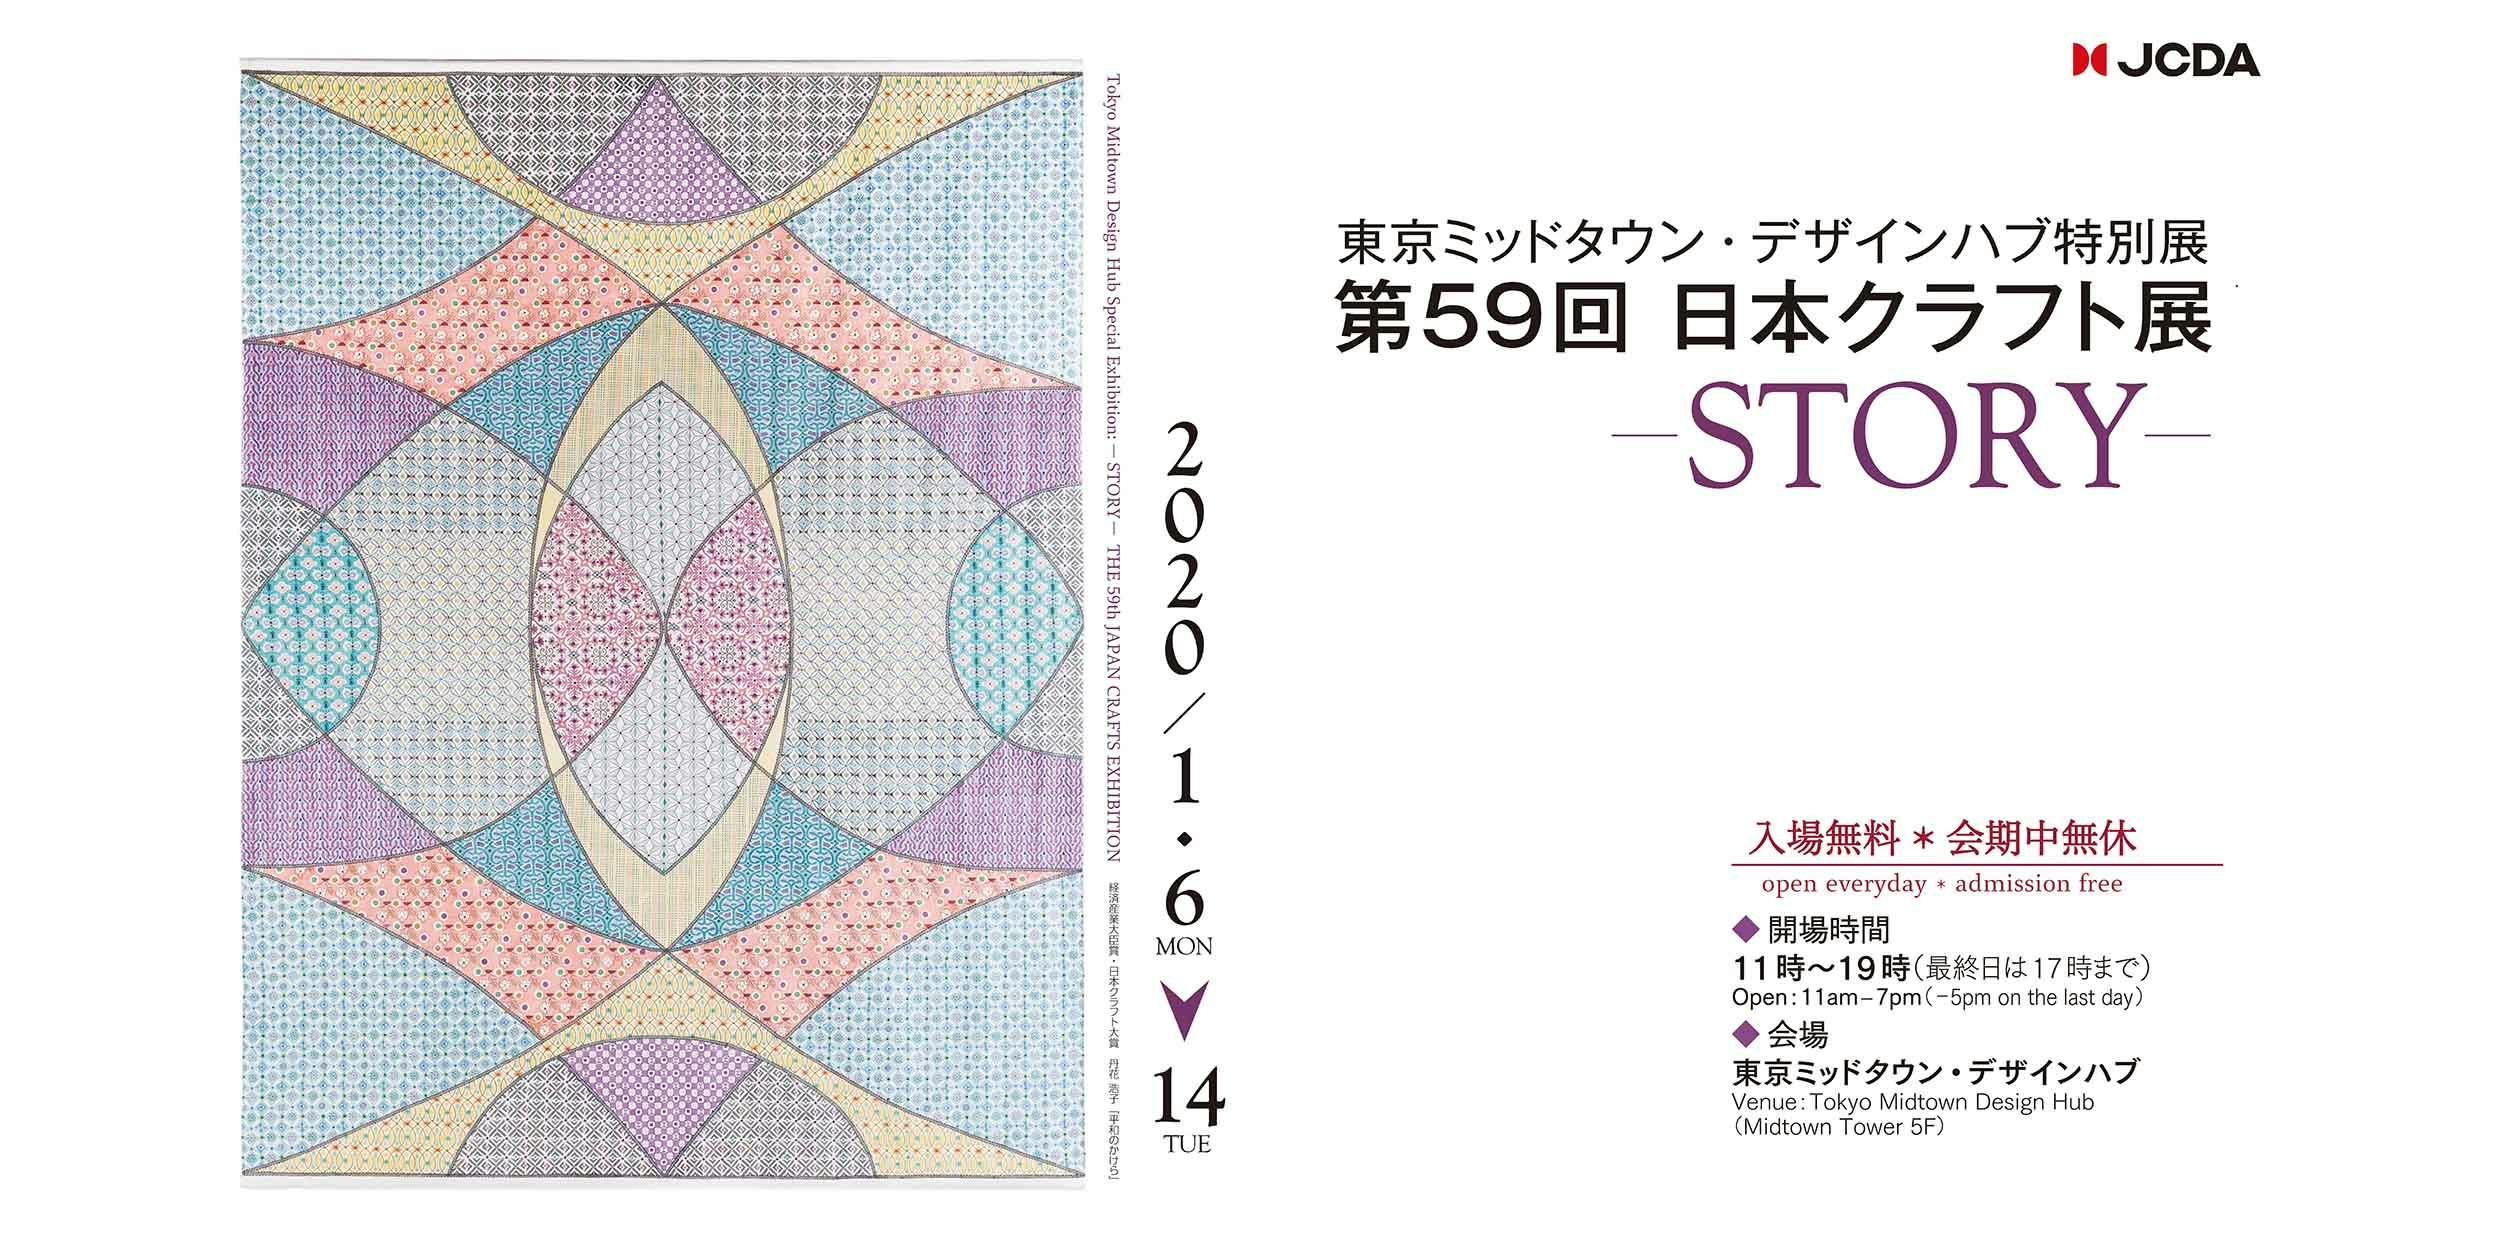 - STORY - THE 59th JAPAN CRAFTS EXHIBITION